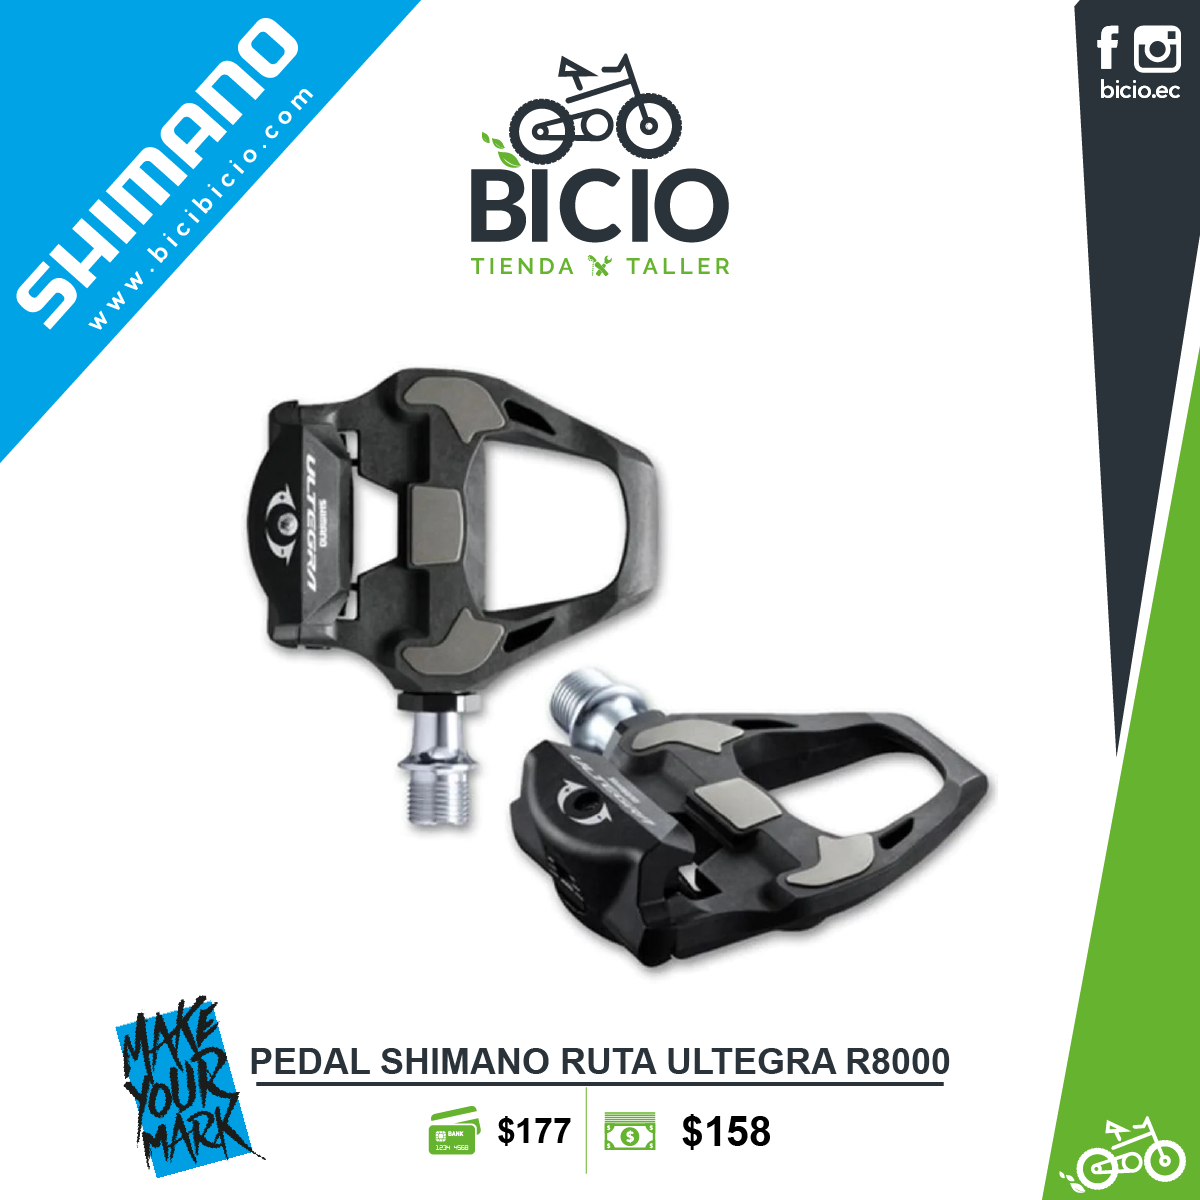 Pedales Shimano Ultegra PD-R8000 – TODOPARACICLISMO